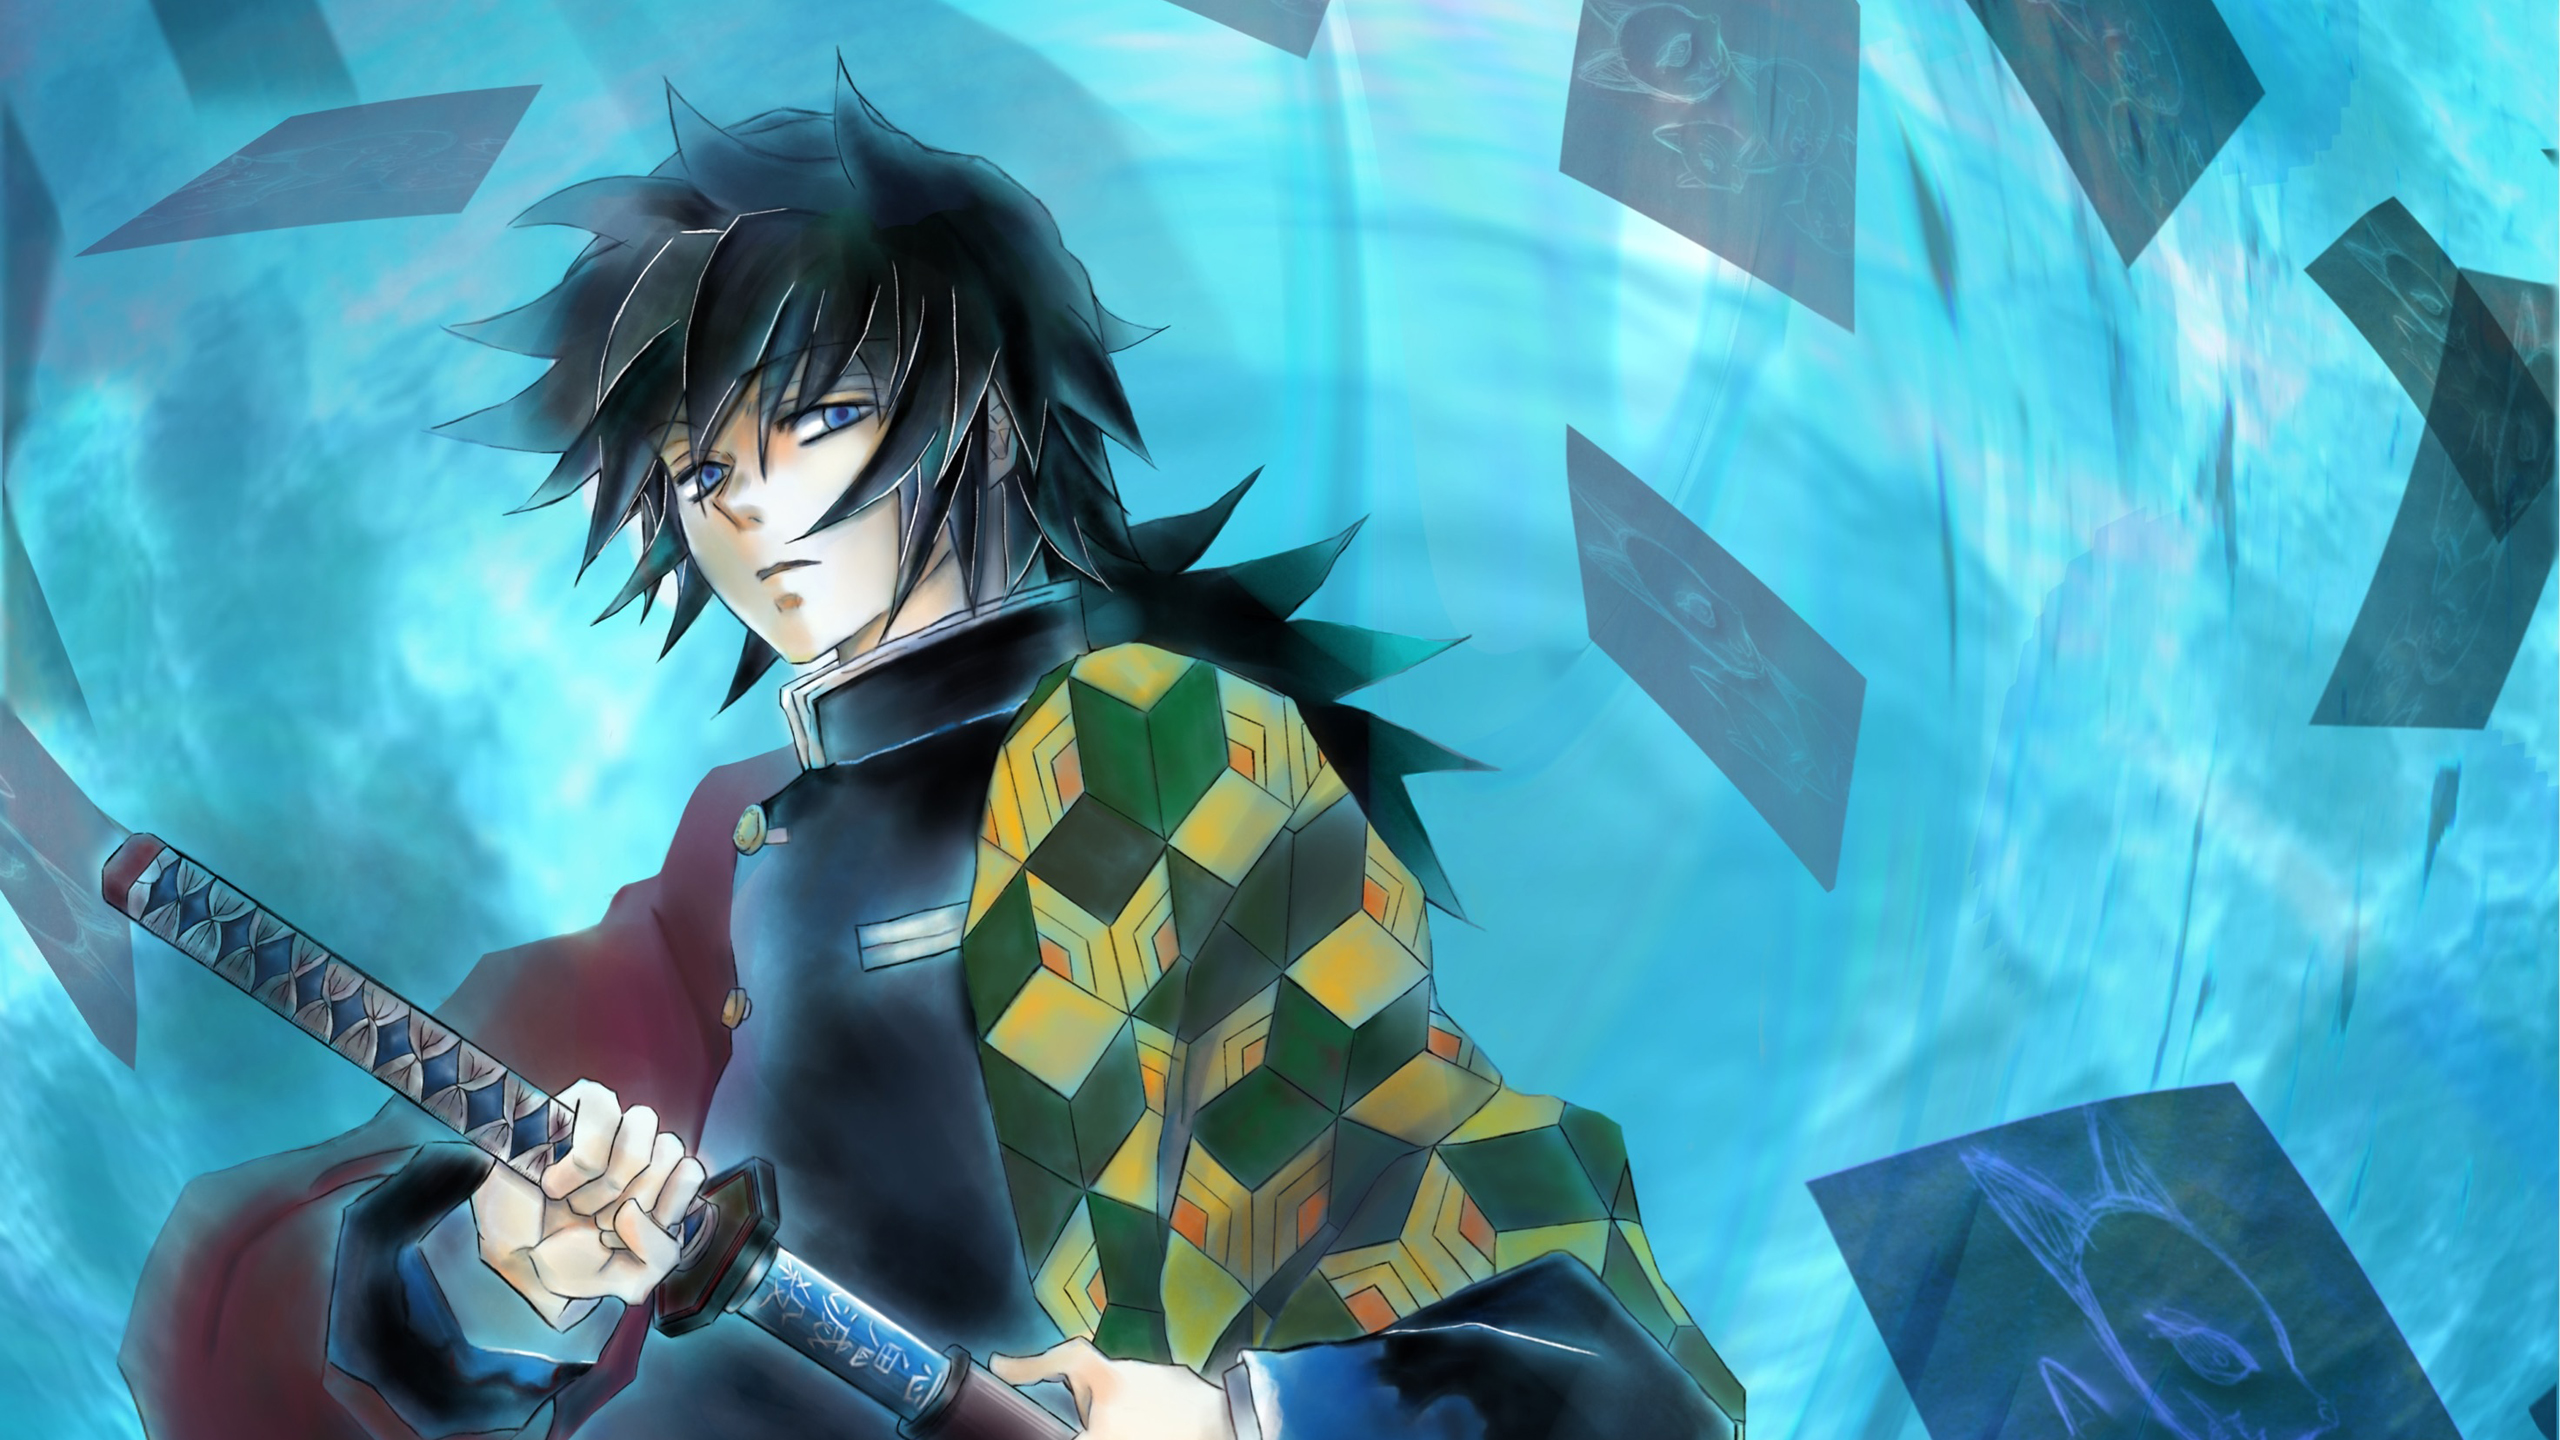 Demon Slayer Giyuu Tomioka With Sword With Wallpaper Of Blue And Flying Papers HD